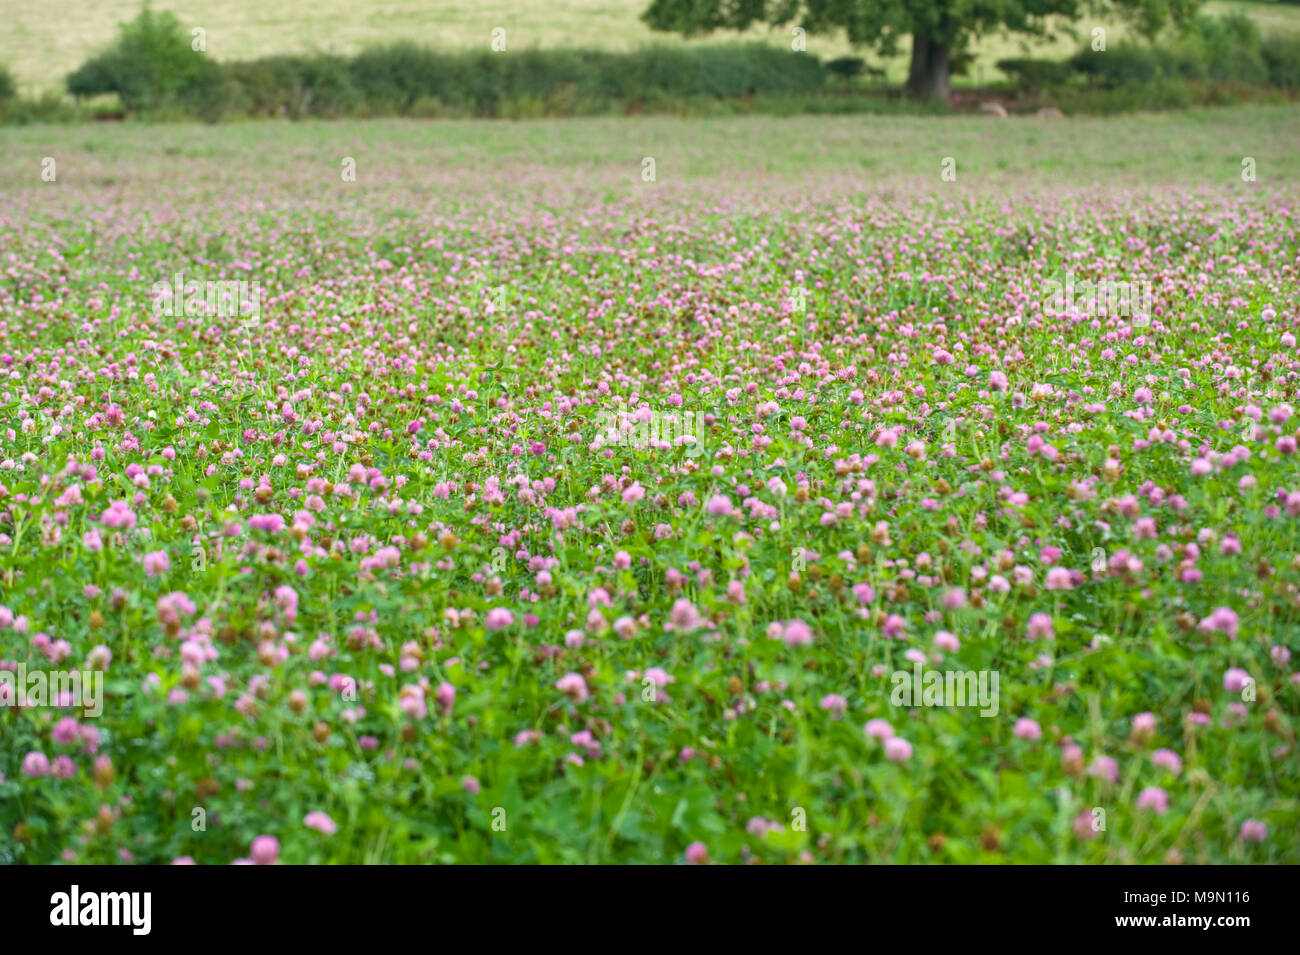 Clover growing in field at Glasbury Powys UK Stock Photo